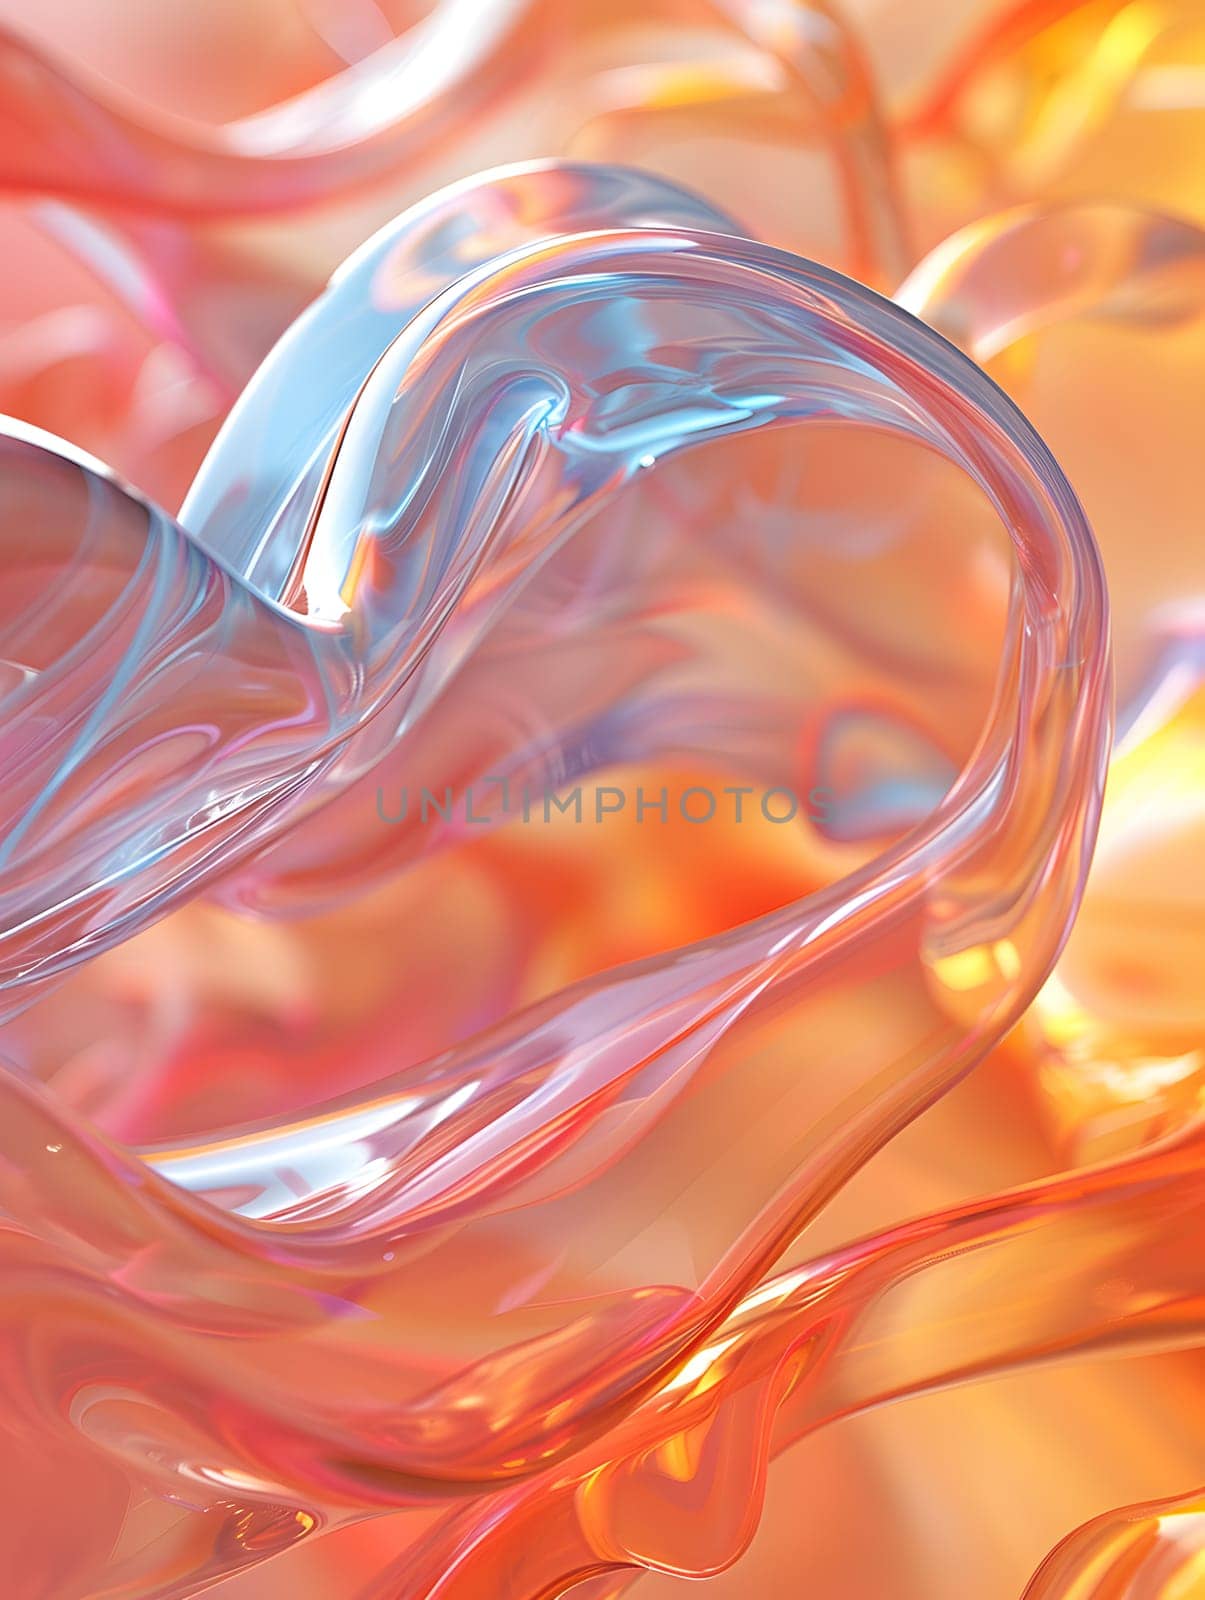 A closeup of a heartshaped liquid object in vibrant colors, ranging from amber and orange to purple and magenta, with elements of electric blue creating a unique pattern